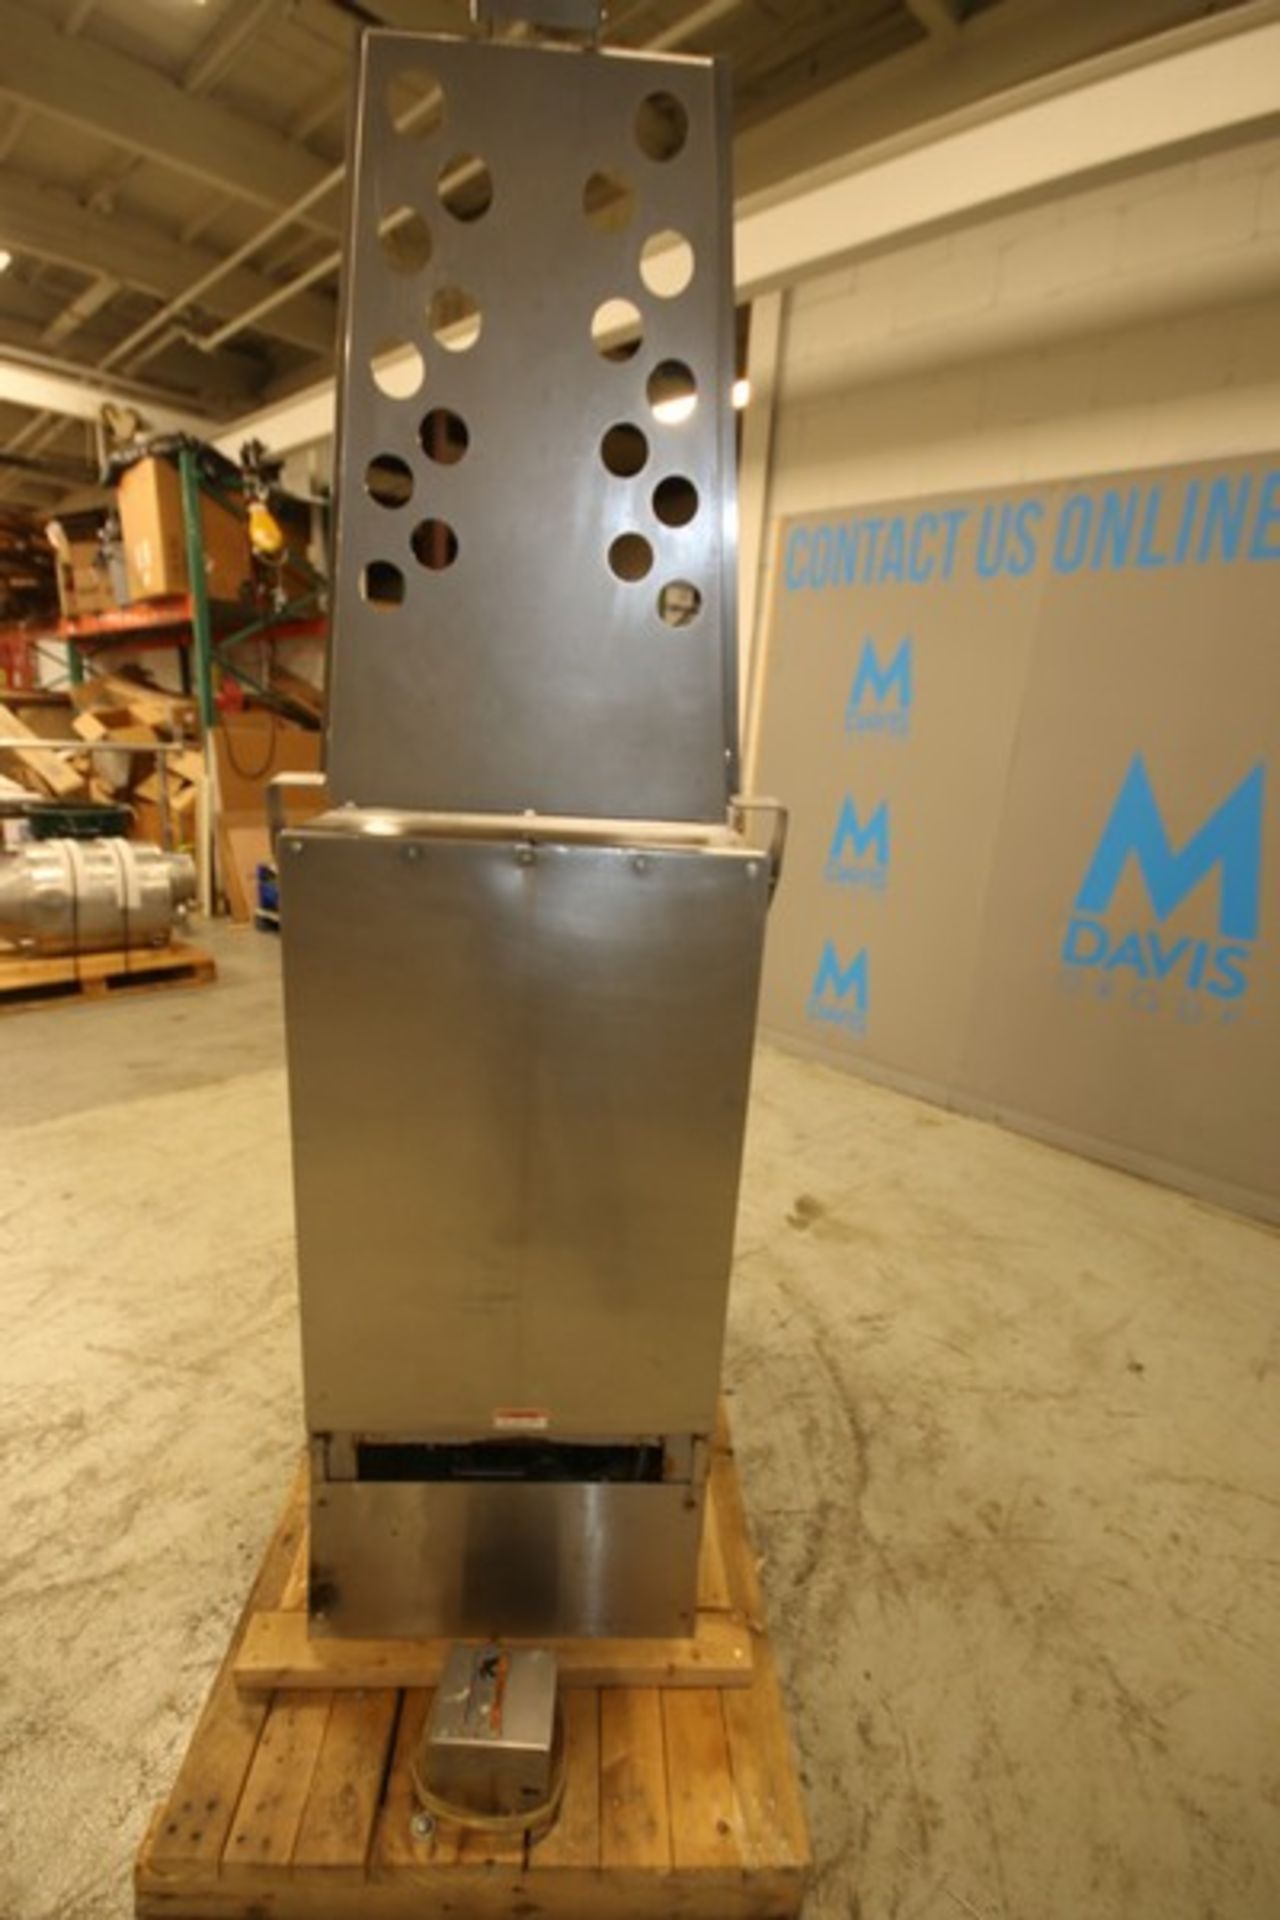 Hobart S/S 150 lb. Capacity Portable Meat Mixer / Grinder, Model MG1532, SN 27-1183-453, with - Image 7 of 8